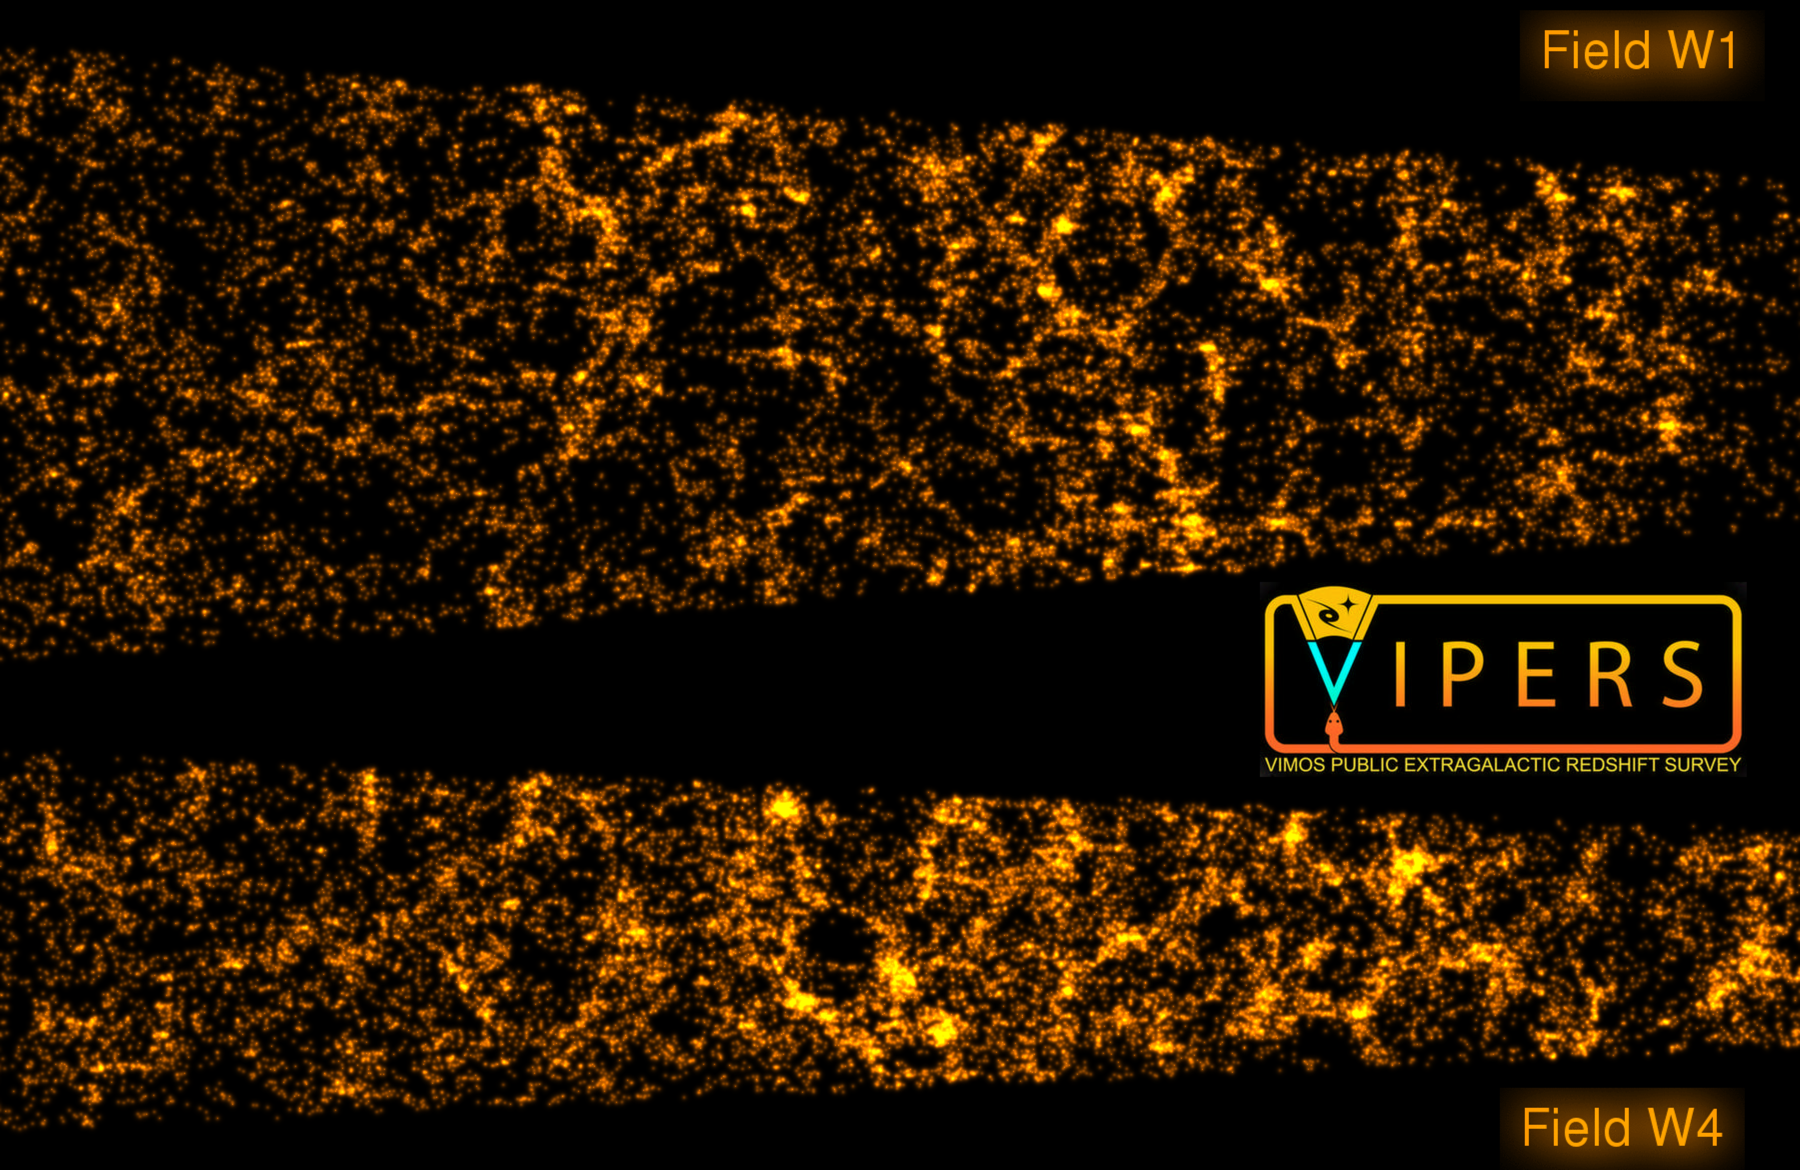 The structure in the galaxy distribution in two VIPERS fields. The long axis of these slices is in the direction of the line of sight, and covers a length of approximately 6 billion lightyears (redshift 0.4 to 1.1: back to a time when the Universe was only half its present size). Even at that time, gravity had pulled together filaments of matter into structures that are so large that light would take hundreds of millions of years to travel from one end to the other.